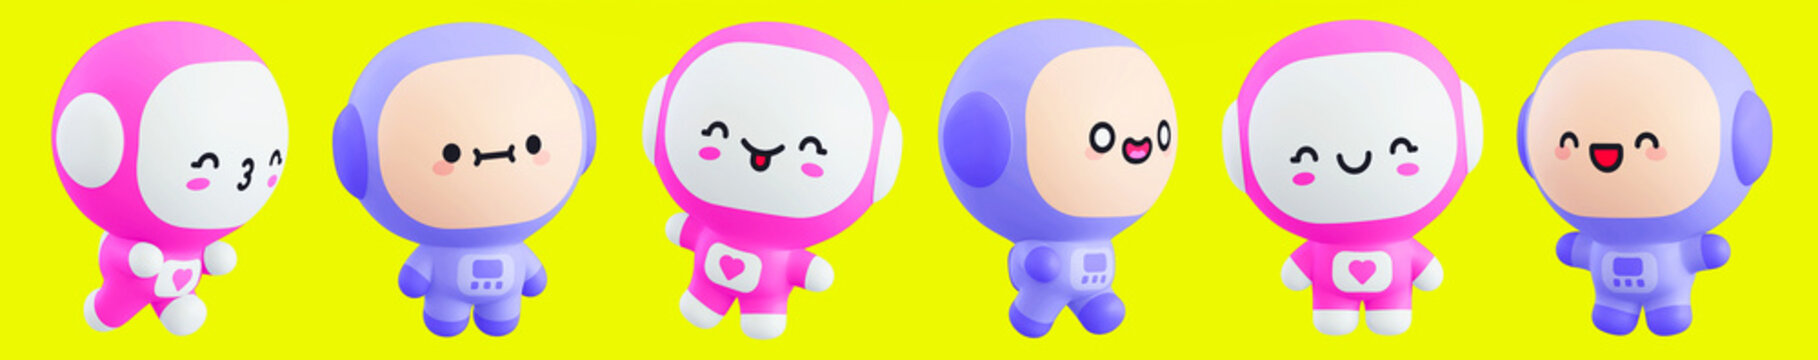 Funny little kawaii character set. Cartoon pink and blue astronaut 3d render illustration on yellow backdrop